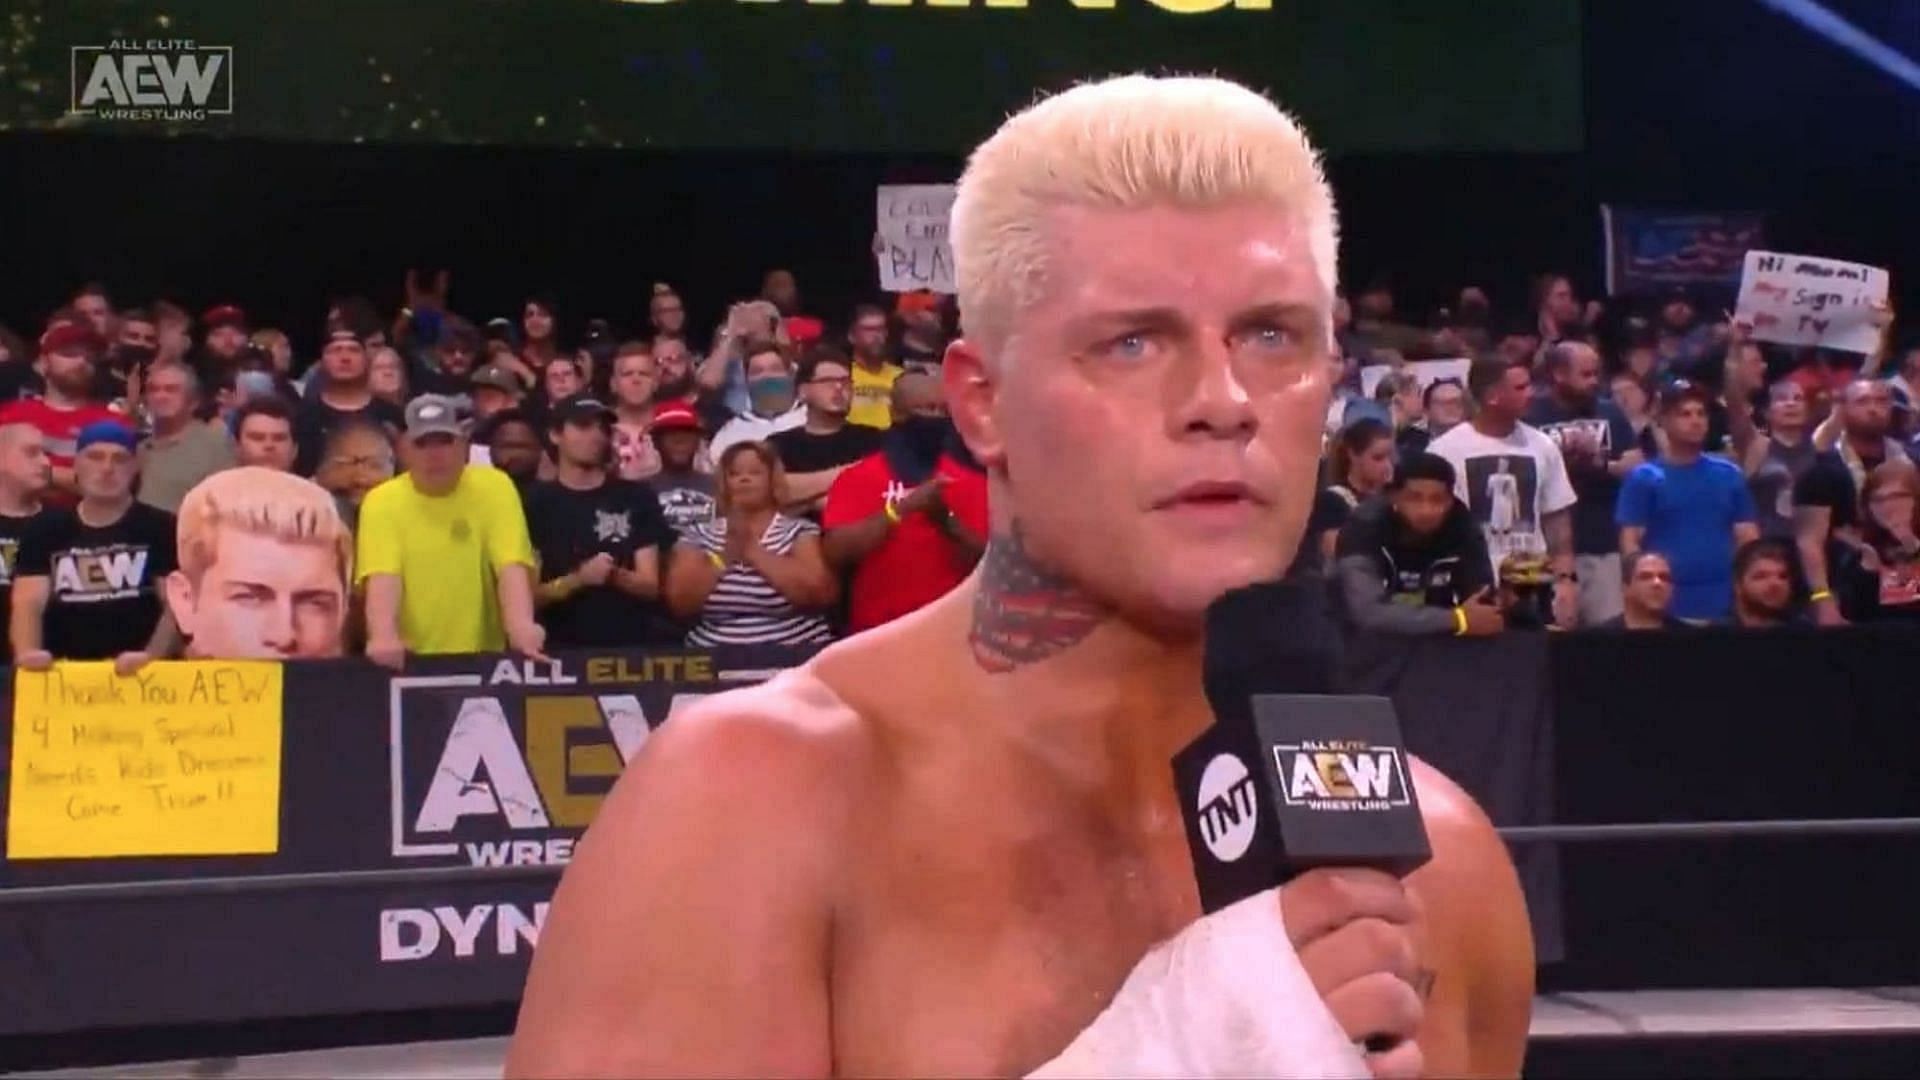 Is there more than meets the eye when it comes to Cody Rhodes? (Pic Source: AEW)